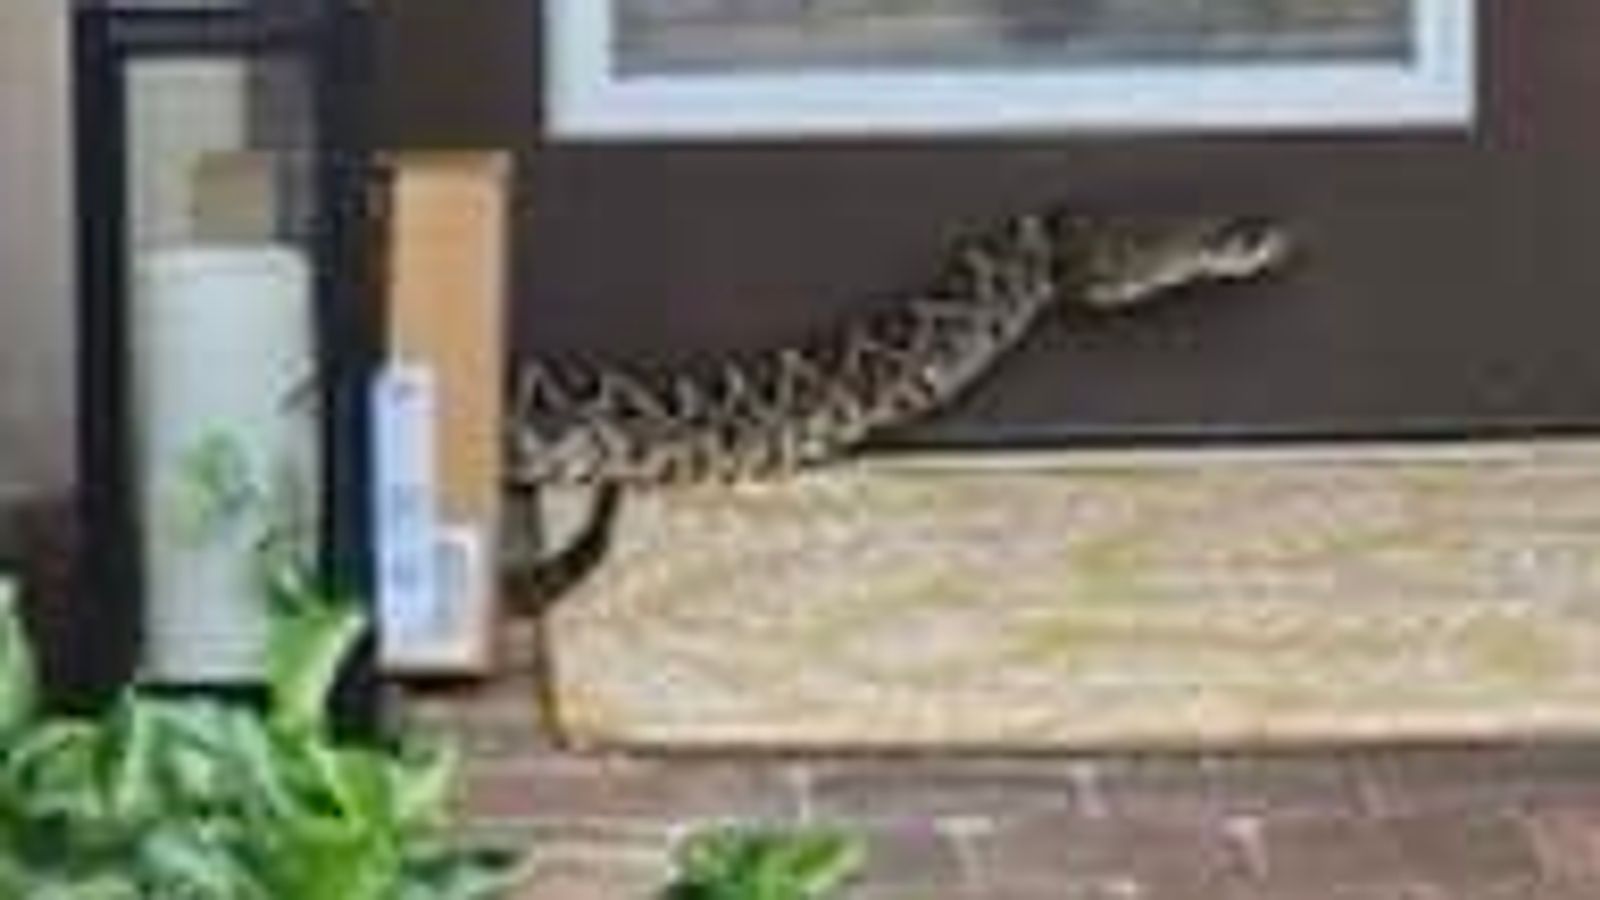 Amazon driver in serious condition after 'highly venomous' snake attack in Palm City